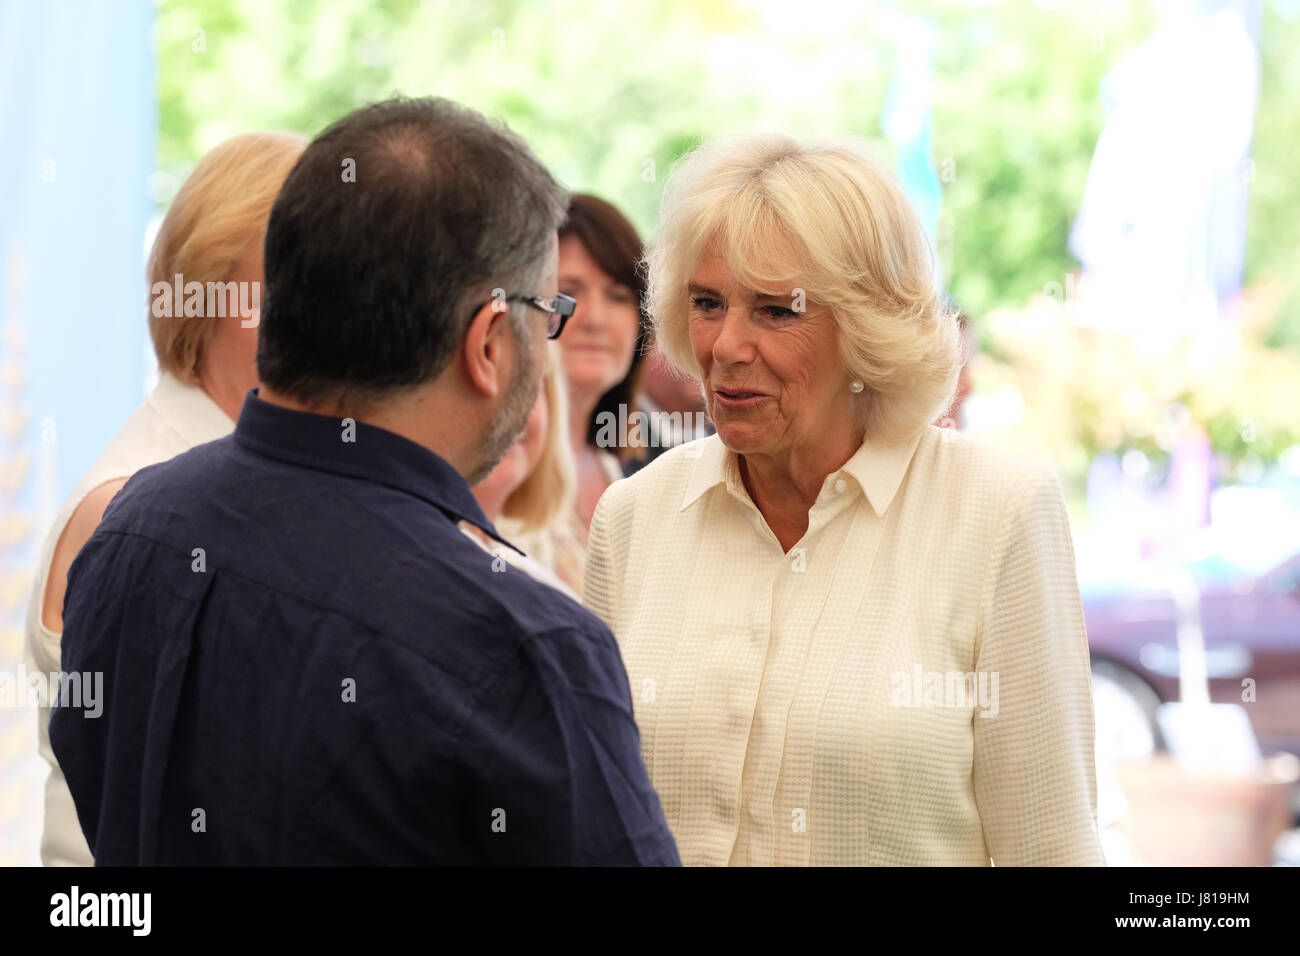 Hay Festival 2017 - Hay on Wye, Wales, UK - Friday 26th May 2017 - HRH Camilla Duchess of Cornwall arrives at the Hay Festival and is seen with Peter Florence Director of the Hay Festival ( on left ) - the Hay Festival celebrates its 30th anniversary in 2017. Over 4,000 secondary school children will attend the second day of the literary festival that runs until June 4th.  Steven May / Alamy Live News Stock Photo